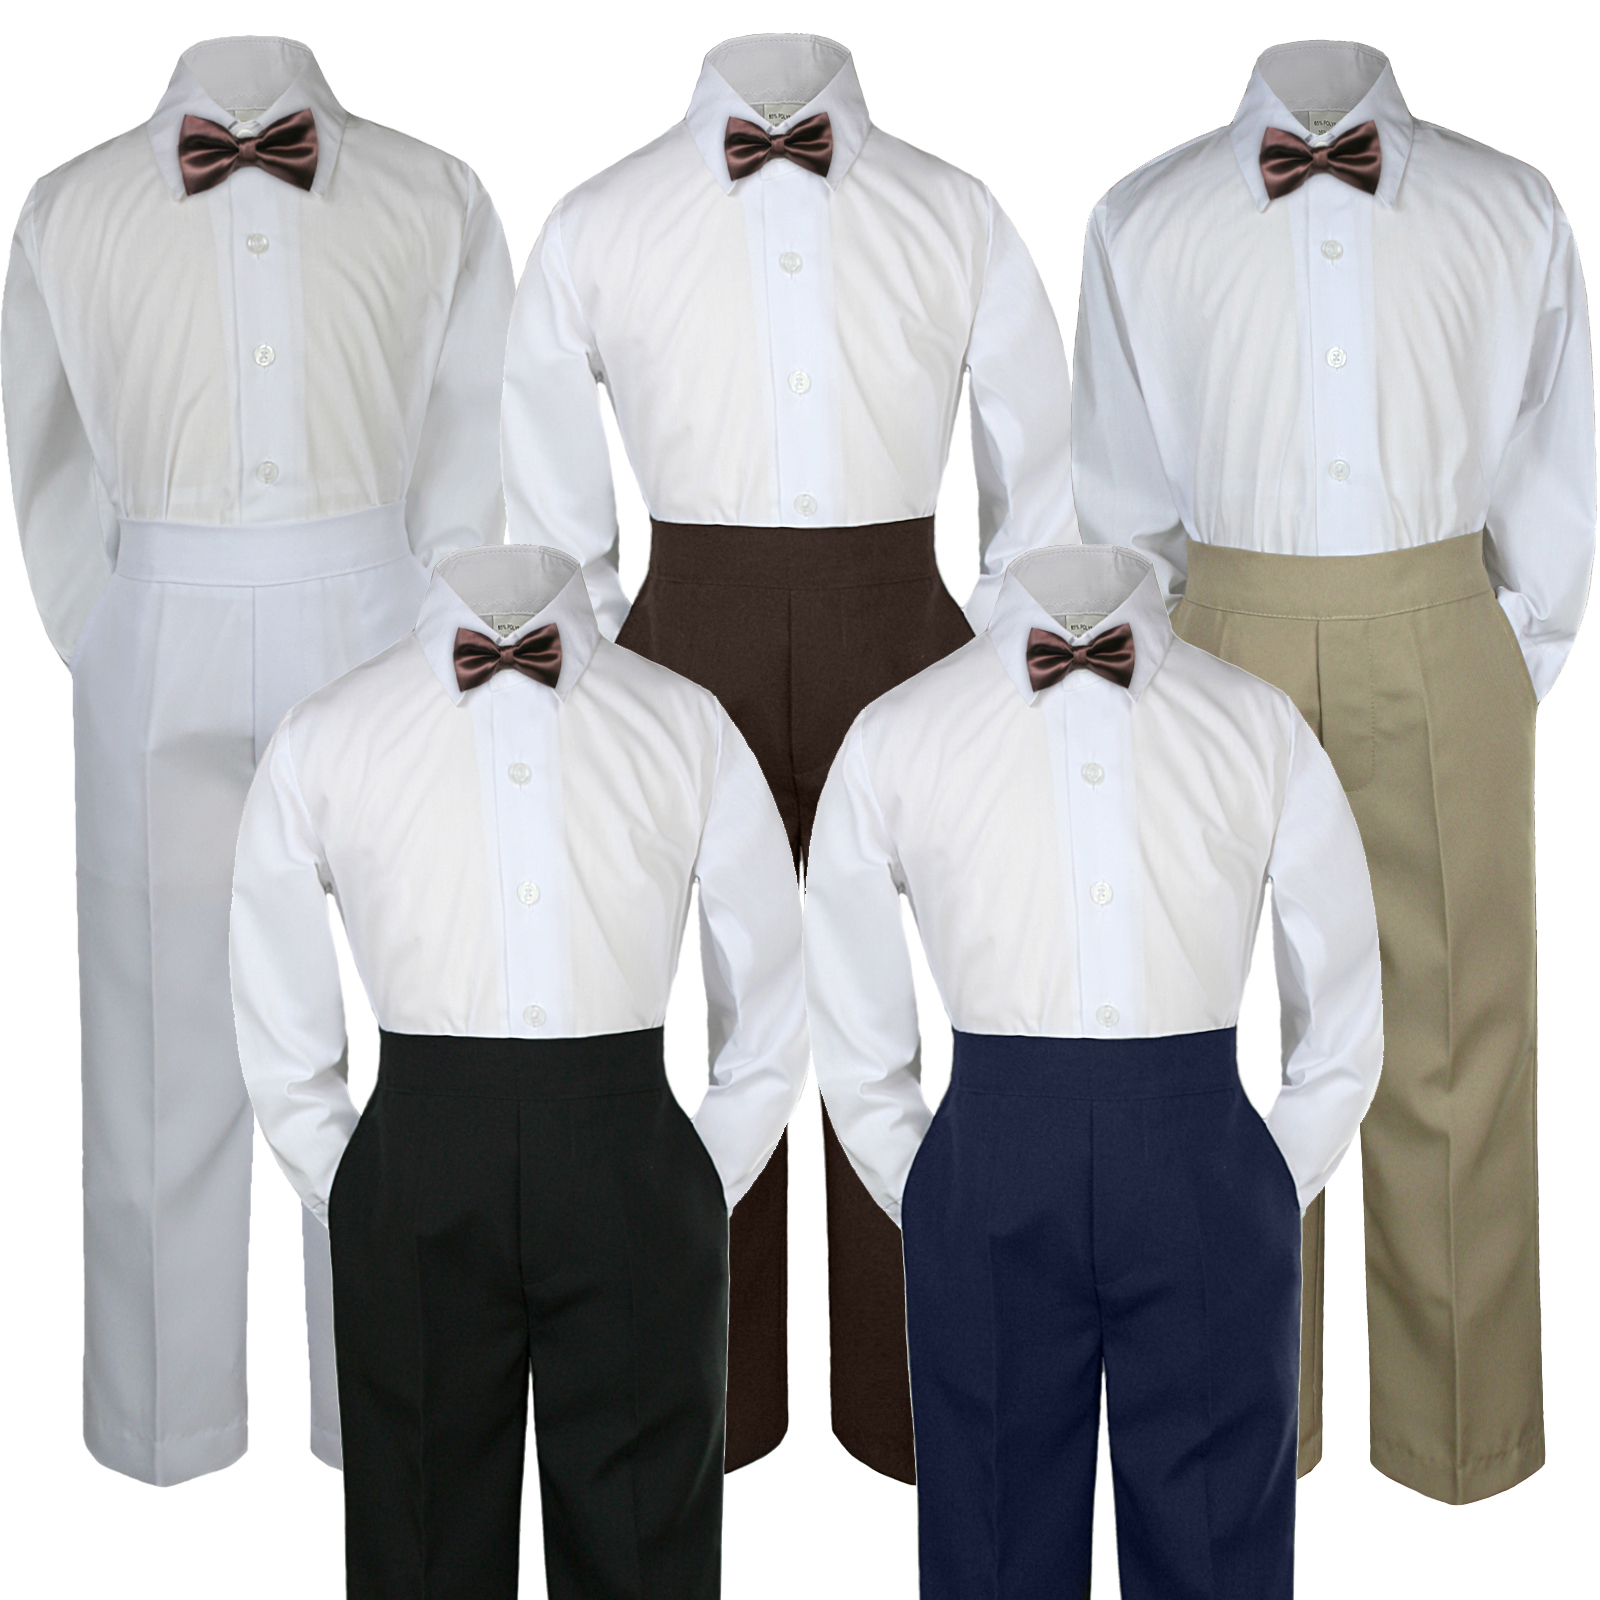 Leadertux 3pc S M L XL 2T 3T 4T Baby Toddler Boys Shirt Pants Suits Tuxedo Formal Wedding Party Outfits Brown Chocolate Bow Tie